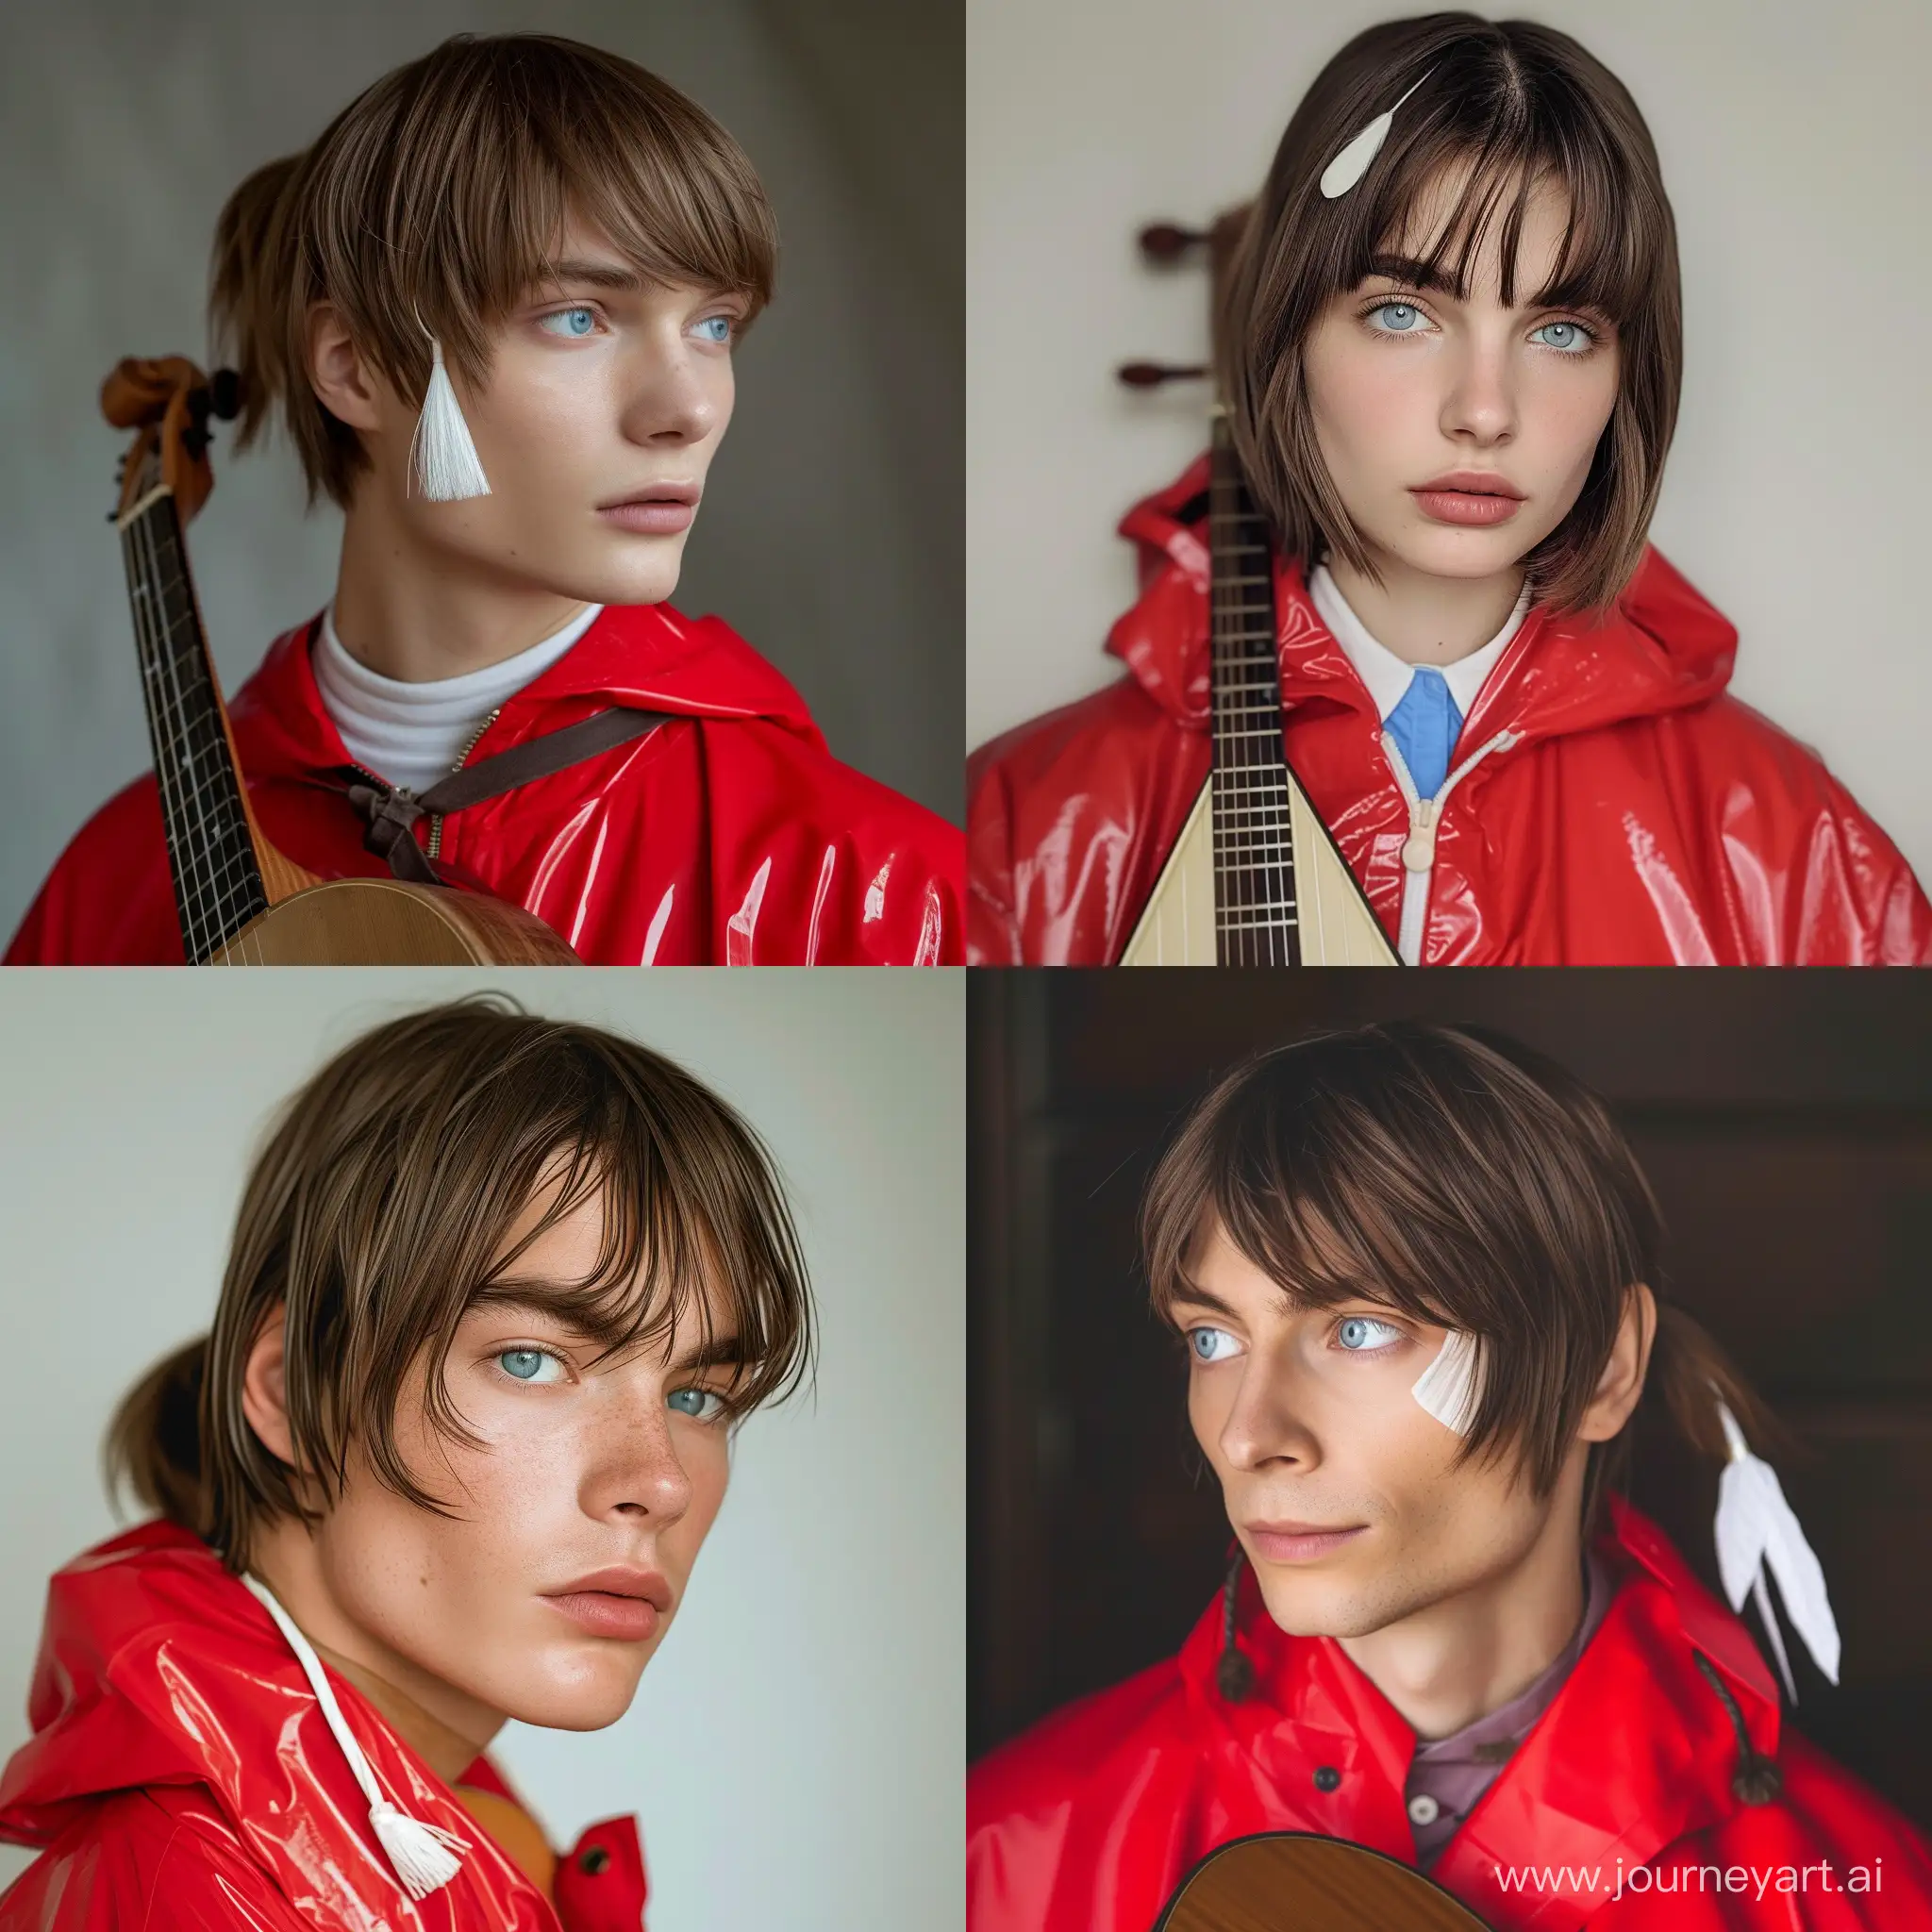 brown hair, short ponytail, straight bangs, white lock of hair on the bangs, bard, lute, bright clothes, shirt, blue eyes. Italian, fair skin, red raincoat, clean face, 27 years old, dark fantasy, male, soft facial features, straight nose